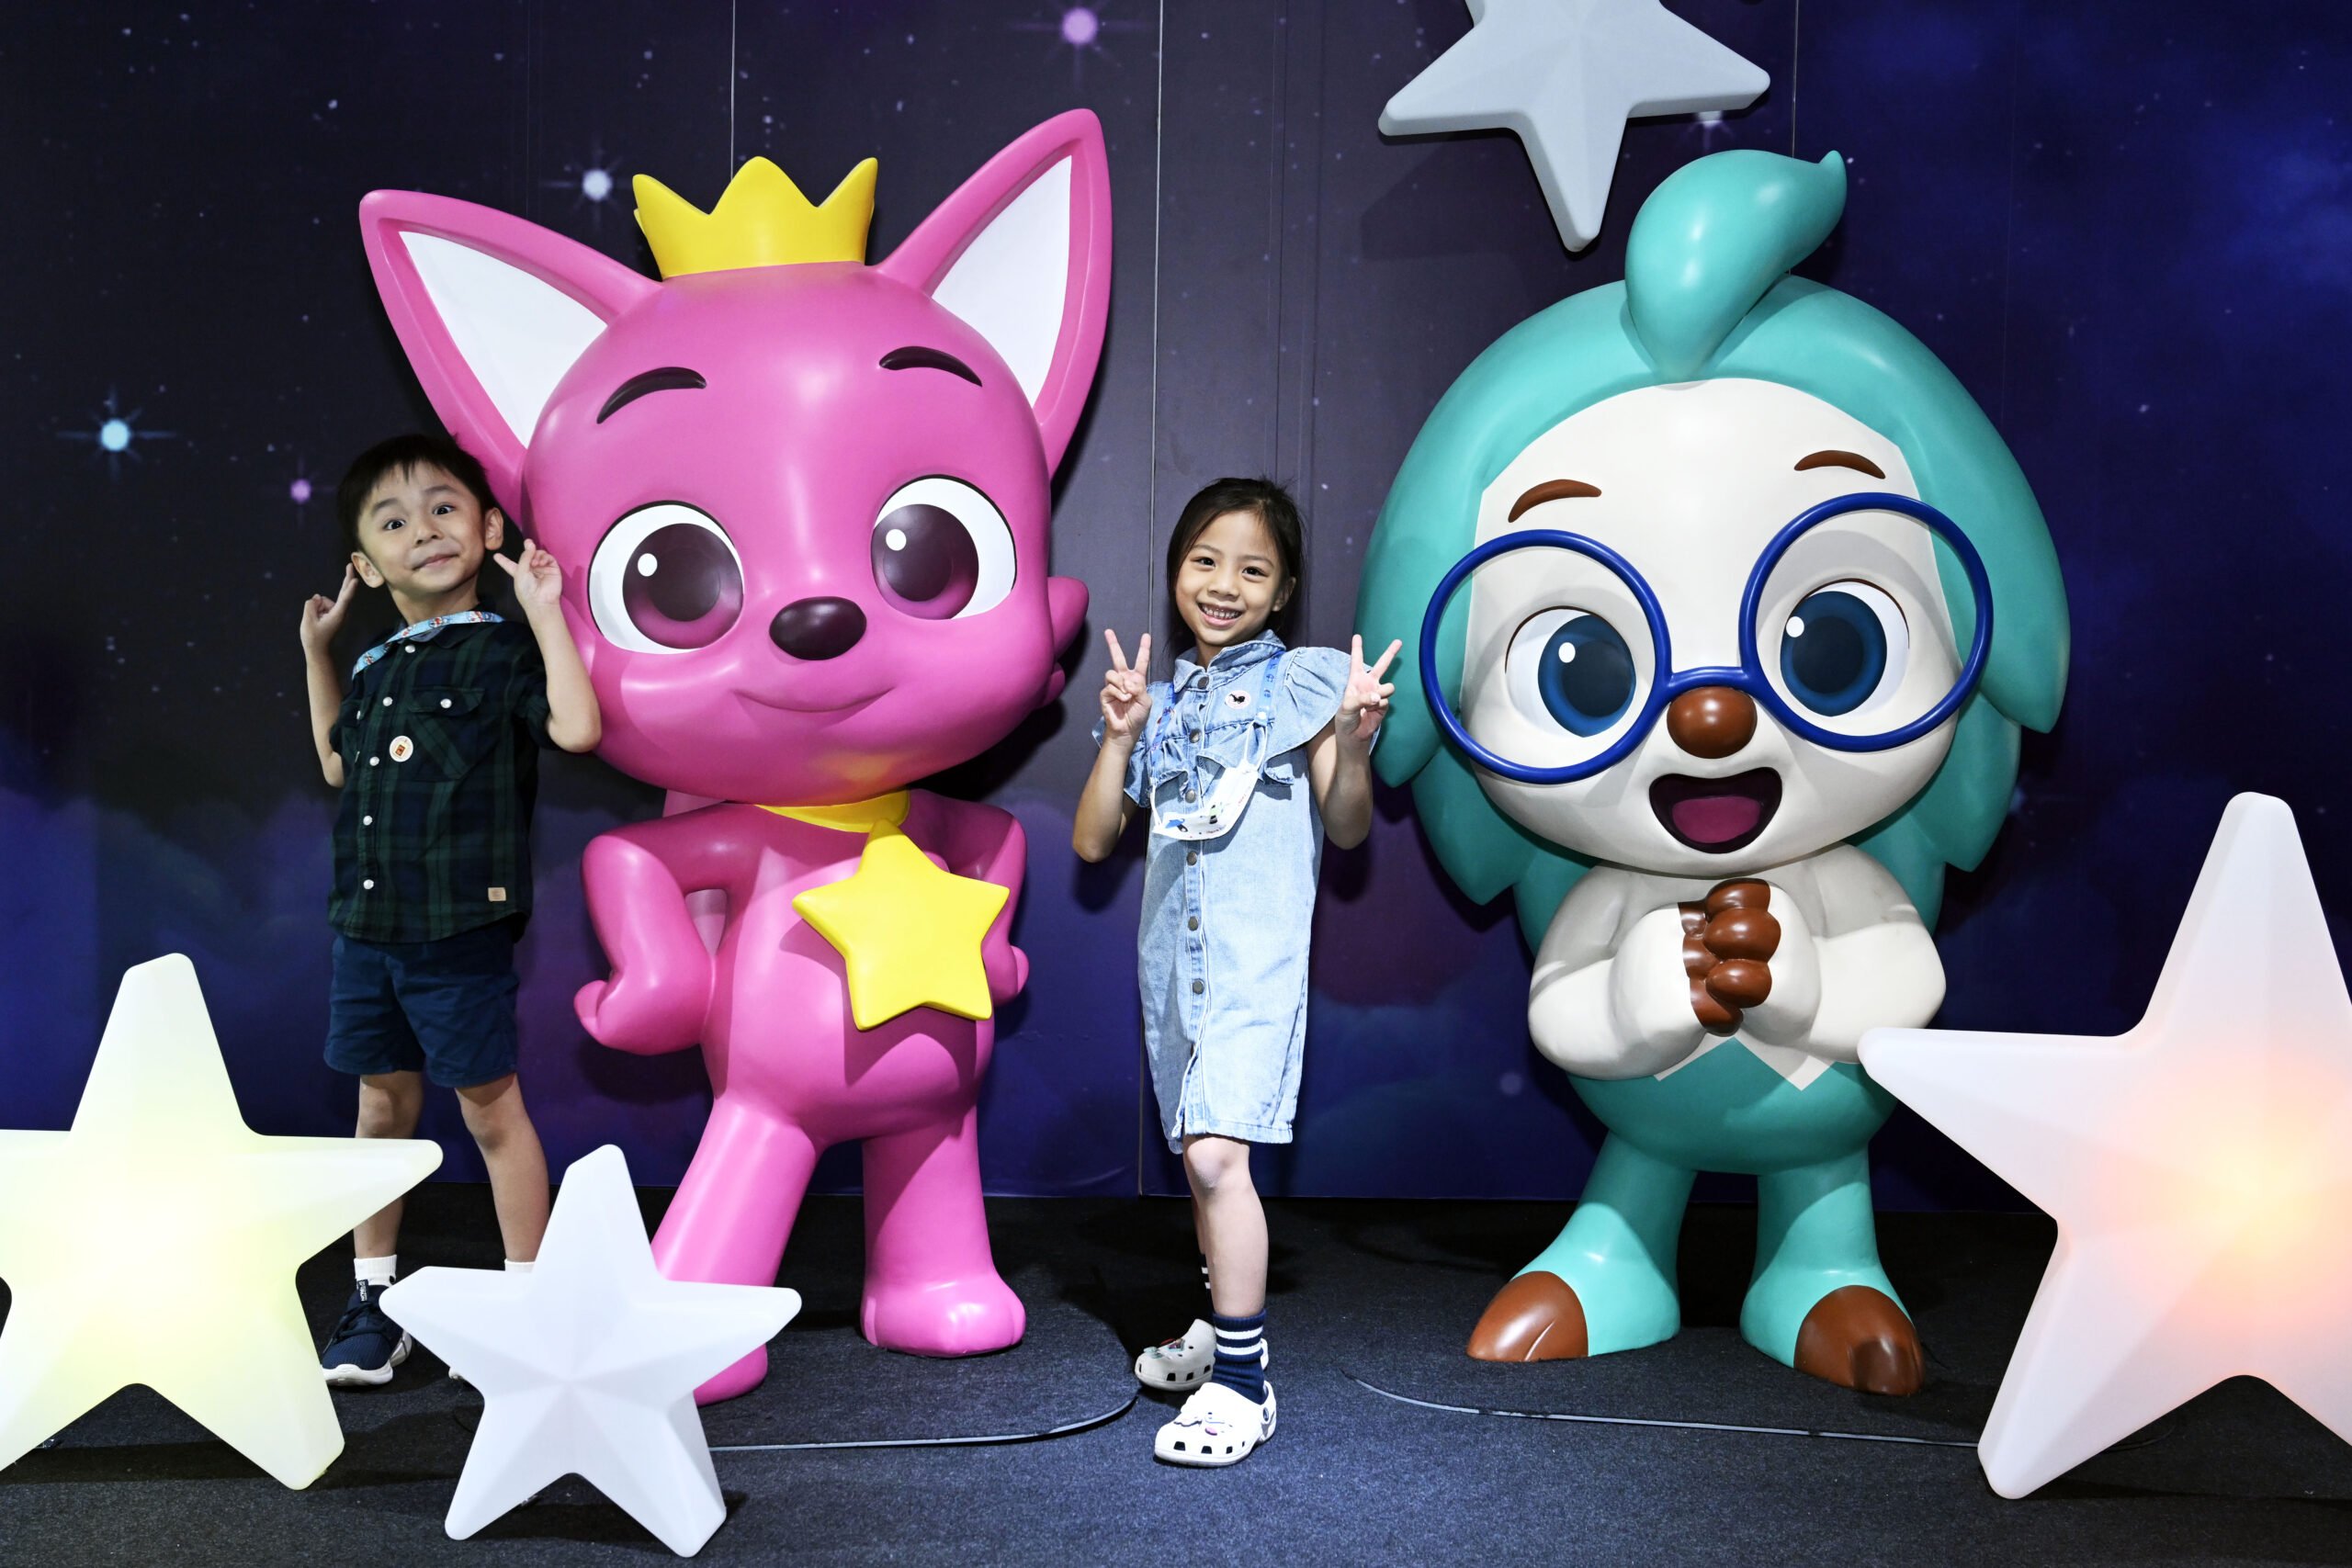 Kids can meet their favourite characters from the Pinkfong universe at Pinkfong World Adventure.